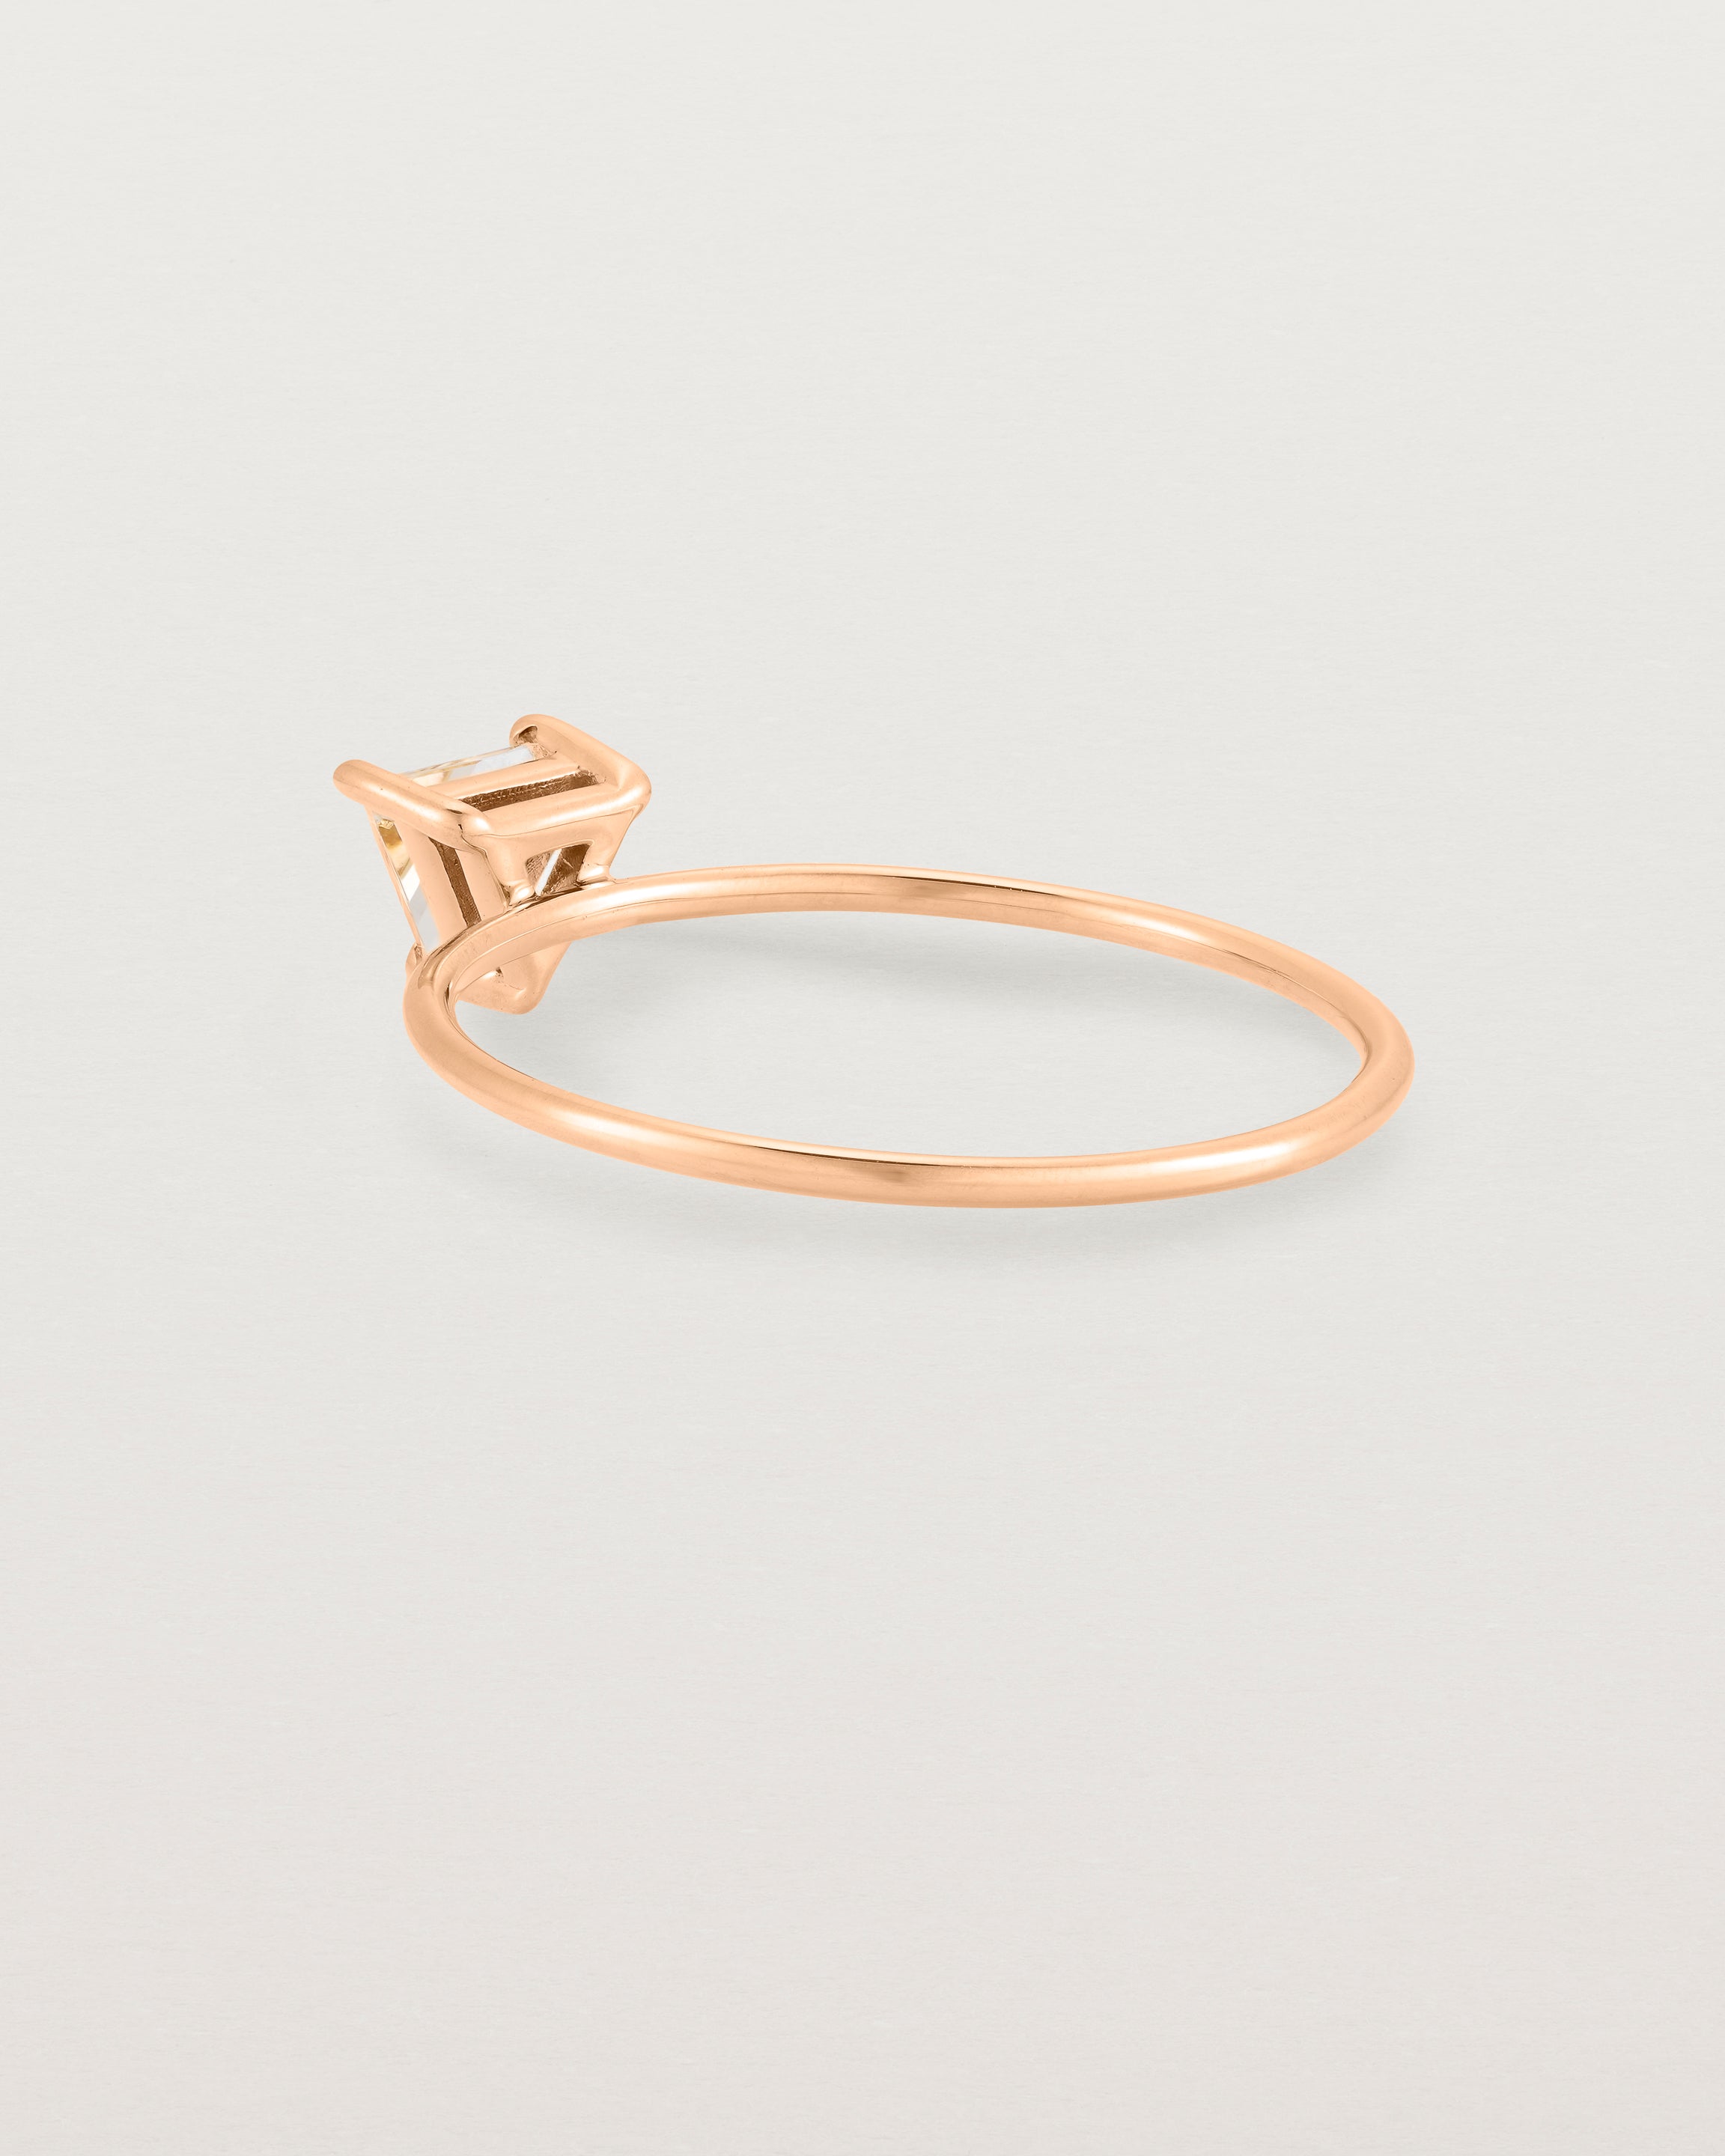 fine rose gold ring featuring a champagne yellow helidor stone